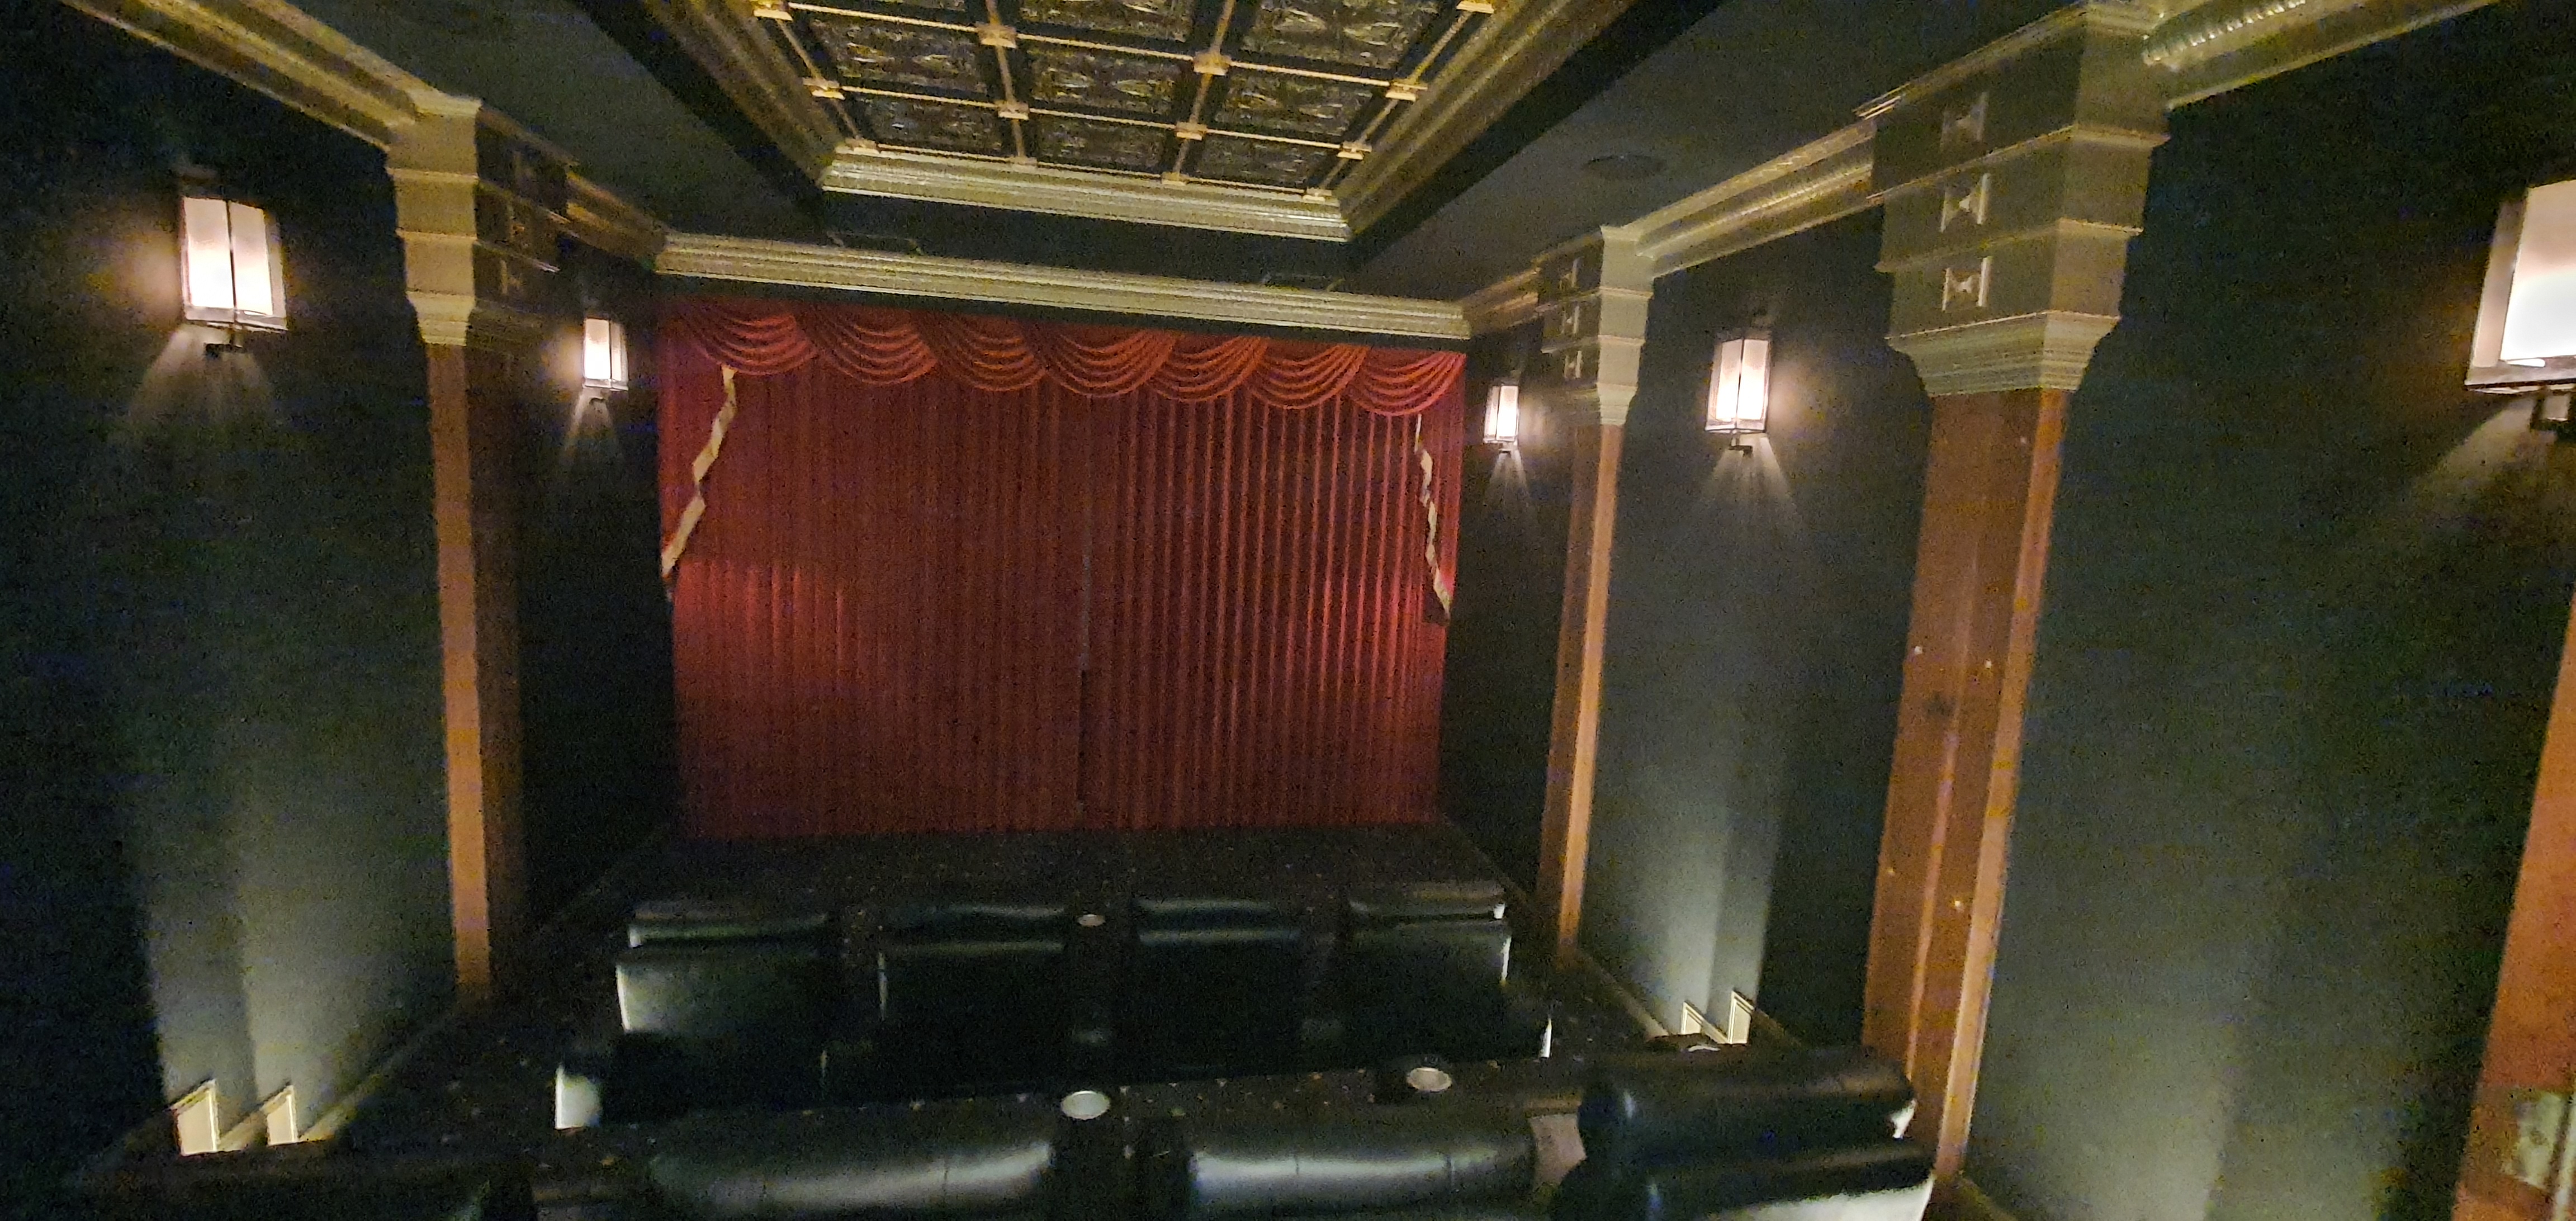 Home Cinema with Theatre style curtains closed covering the projection screen